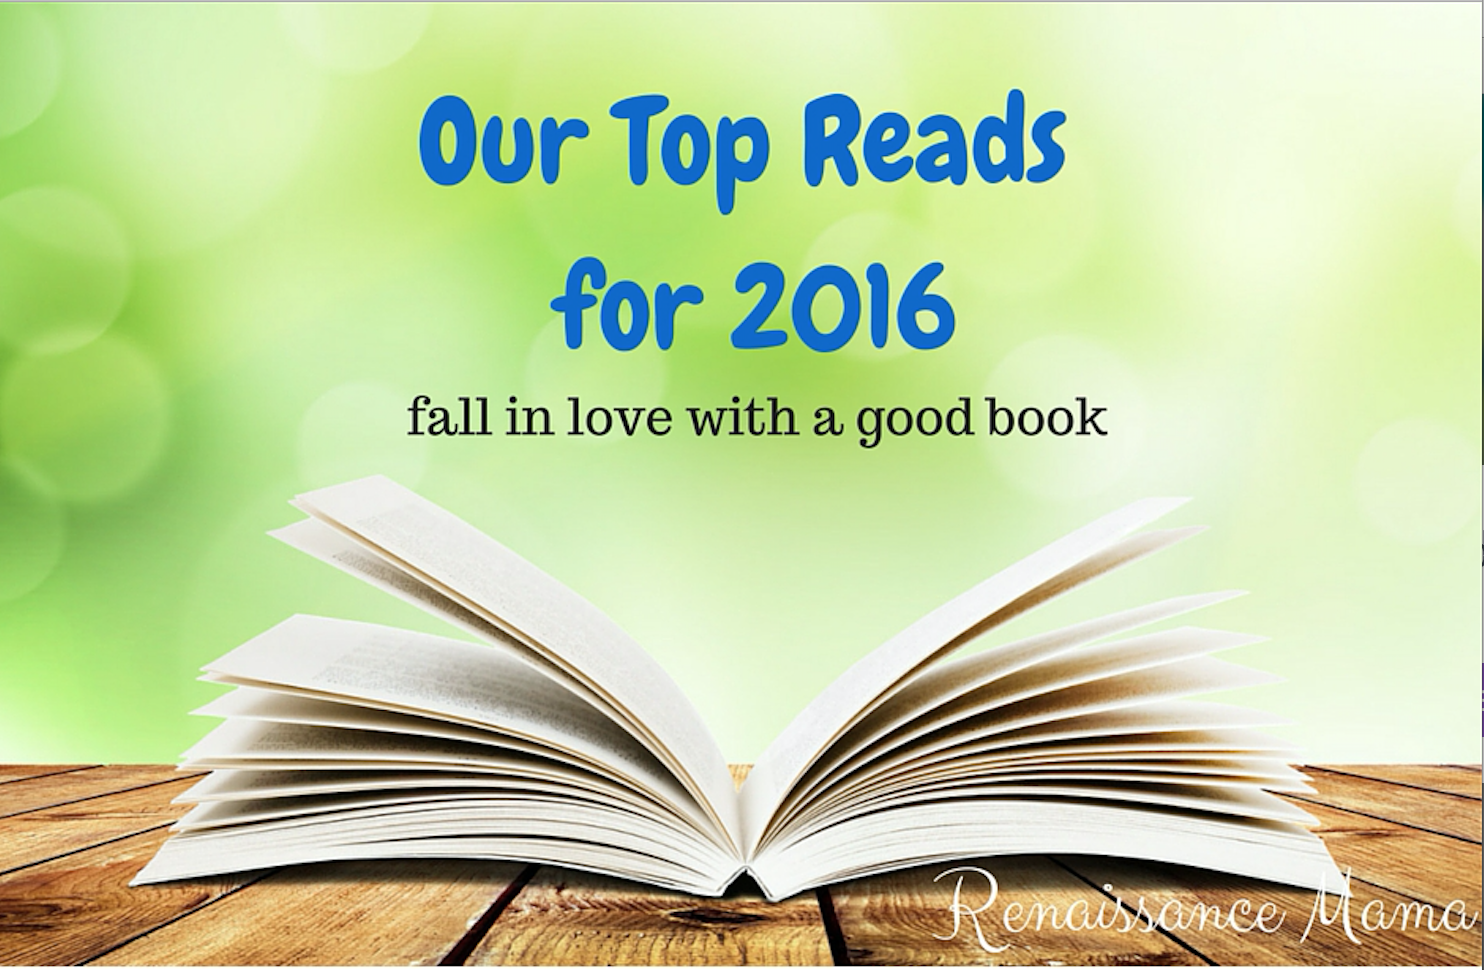 Top Books for 2016